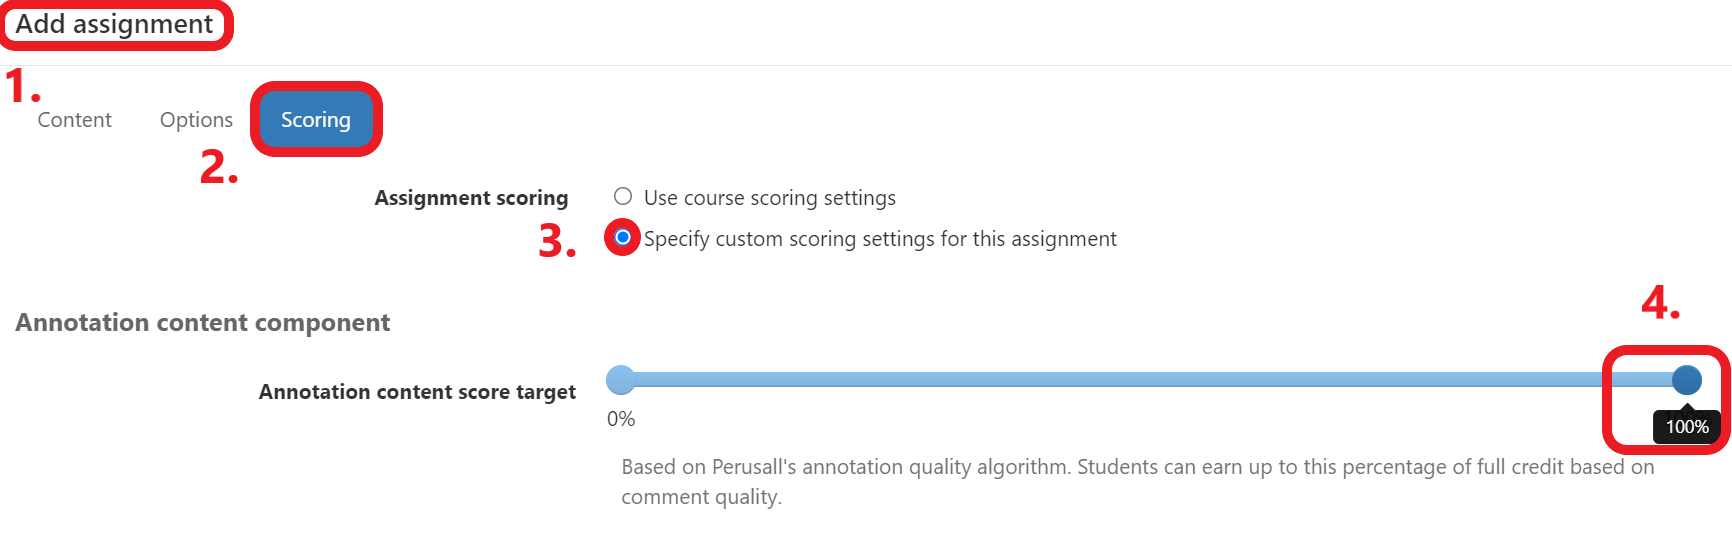 Add assignment window with scoring tab selected. Assignment scoring is set to specify custom scoring settings for this assignment, and annotation content score target is set to 100%.